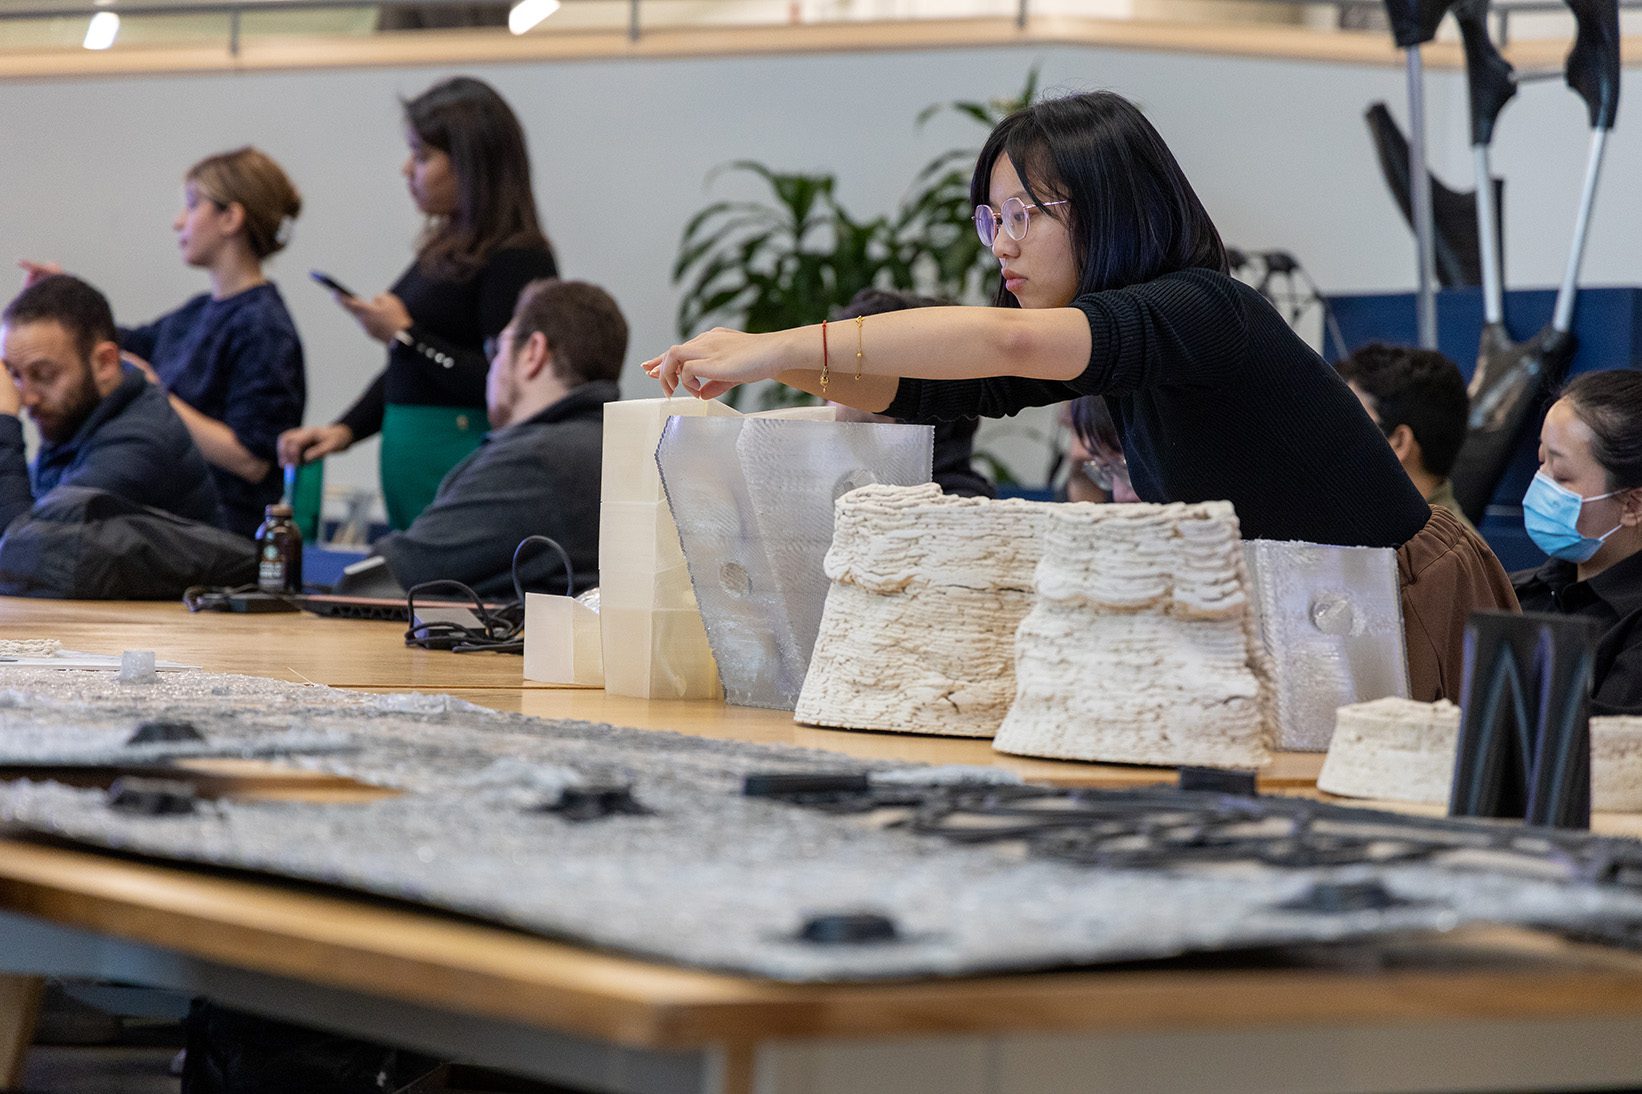 A student makes final adjustments to 3D printed pieces of work during a studio review.